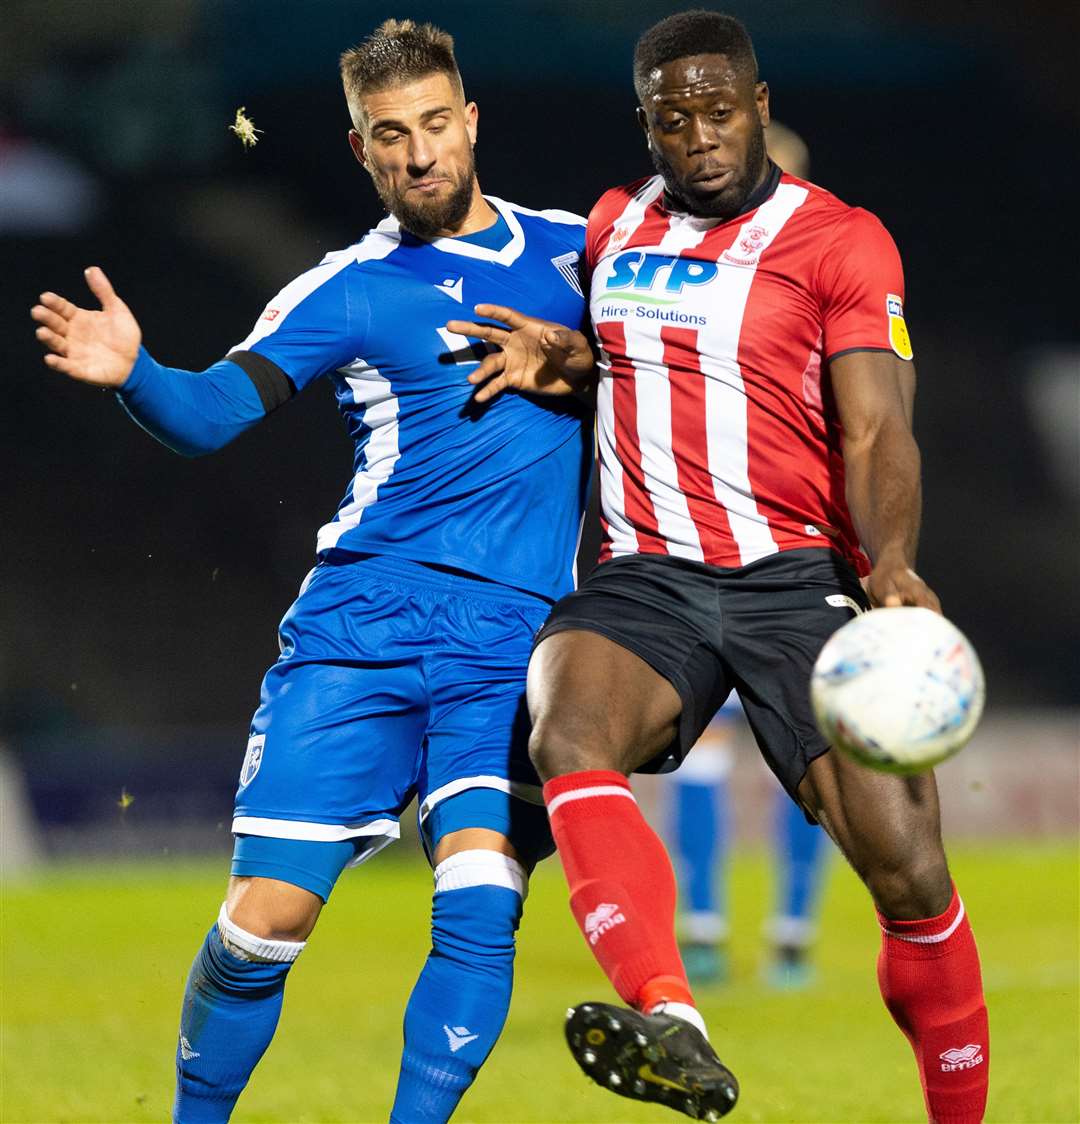 Max Ehmer and John Akinde do battle during Gillingham's game against Lincoln earlier this season Picture: Ady Kerry